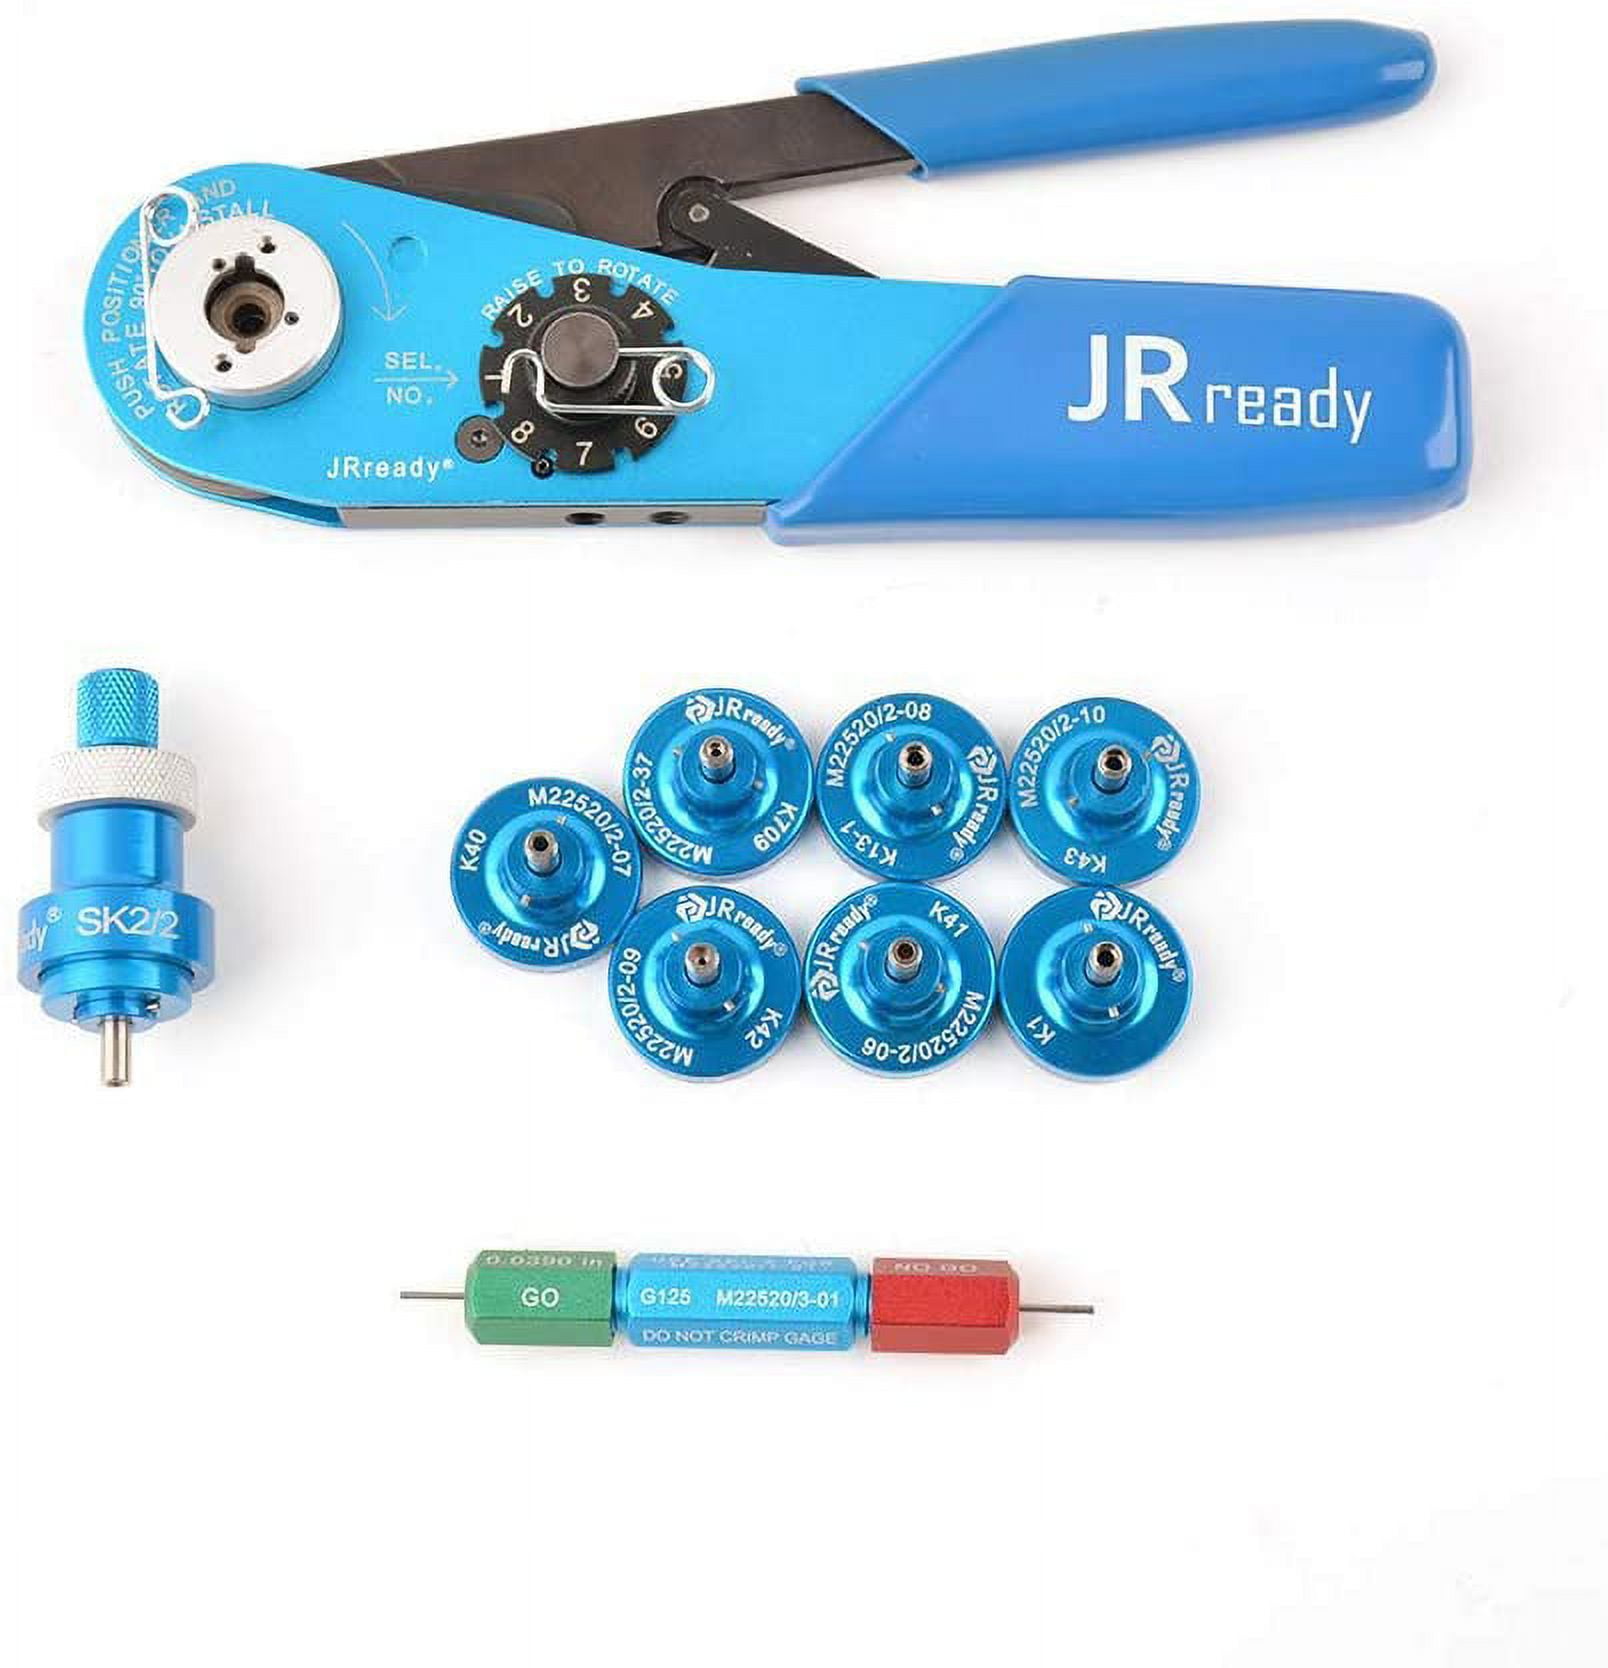 JRready ST2060 M22520 2 Contact Systems Positioner Indent Crimp Connector YJQ Aviation Gauge 32awg for G125 Crimper W1A Solid 20 Kit 01 Electronic and Barrel 615717 7 Miniature and Tool in of